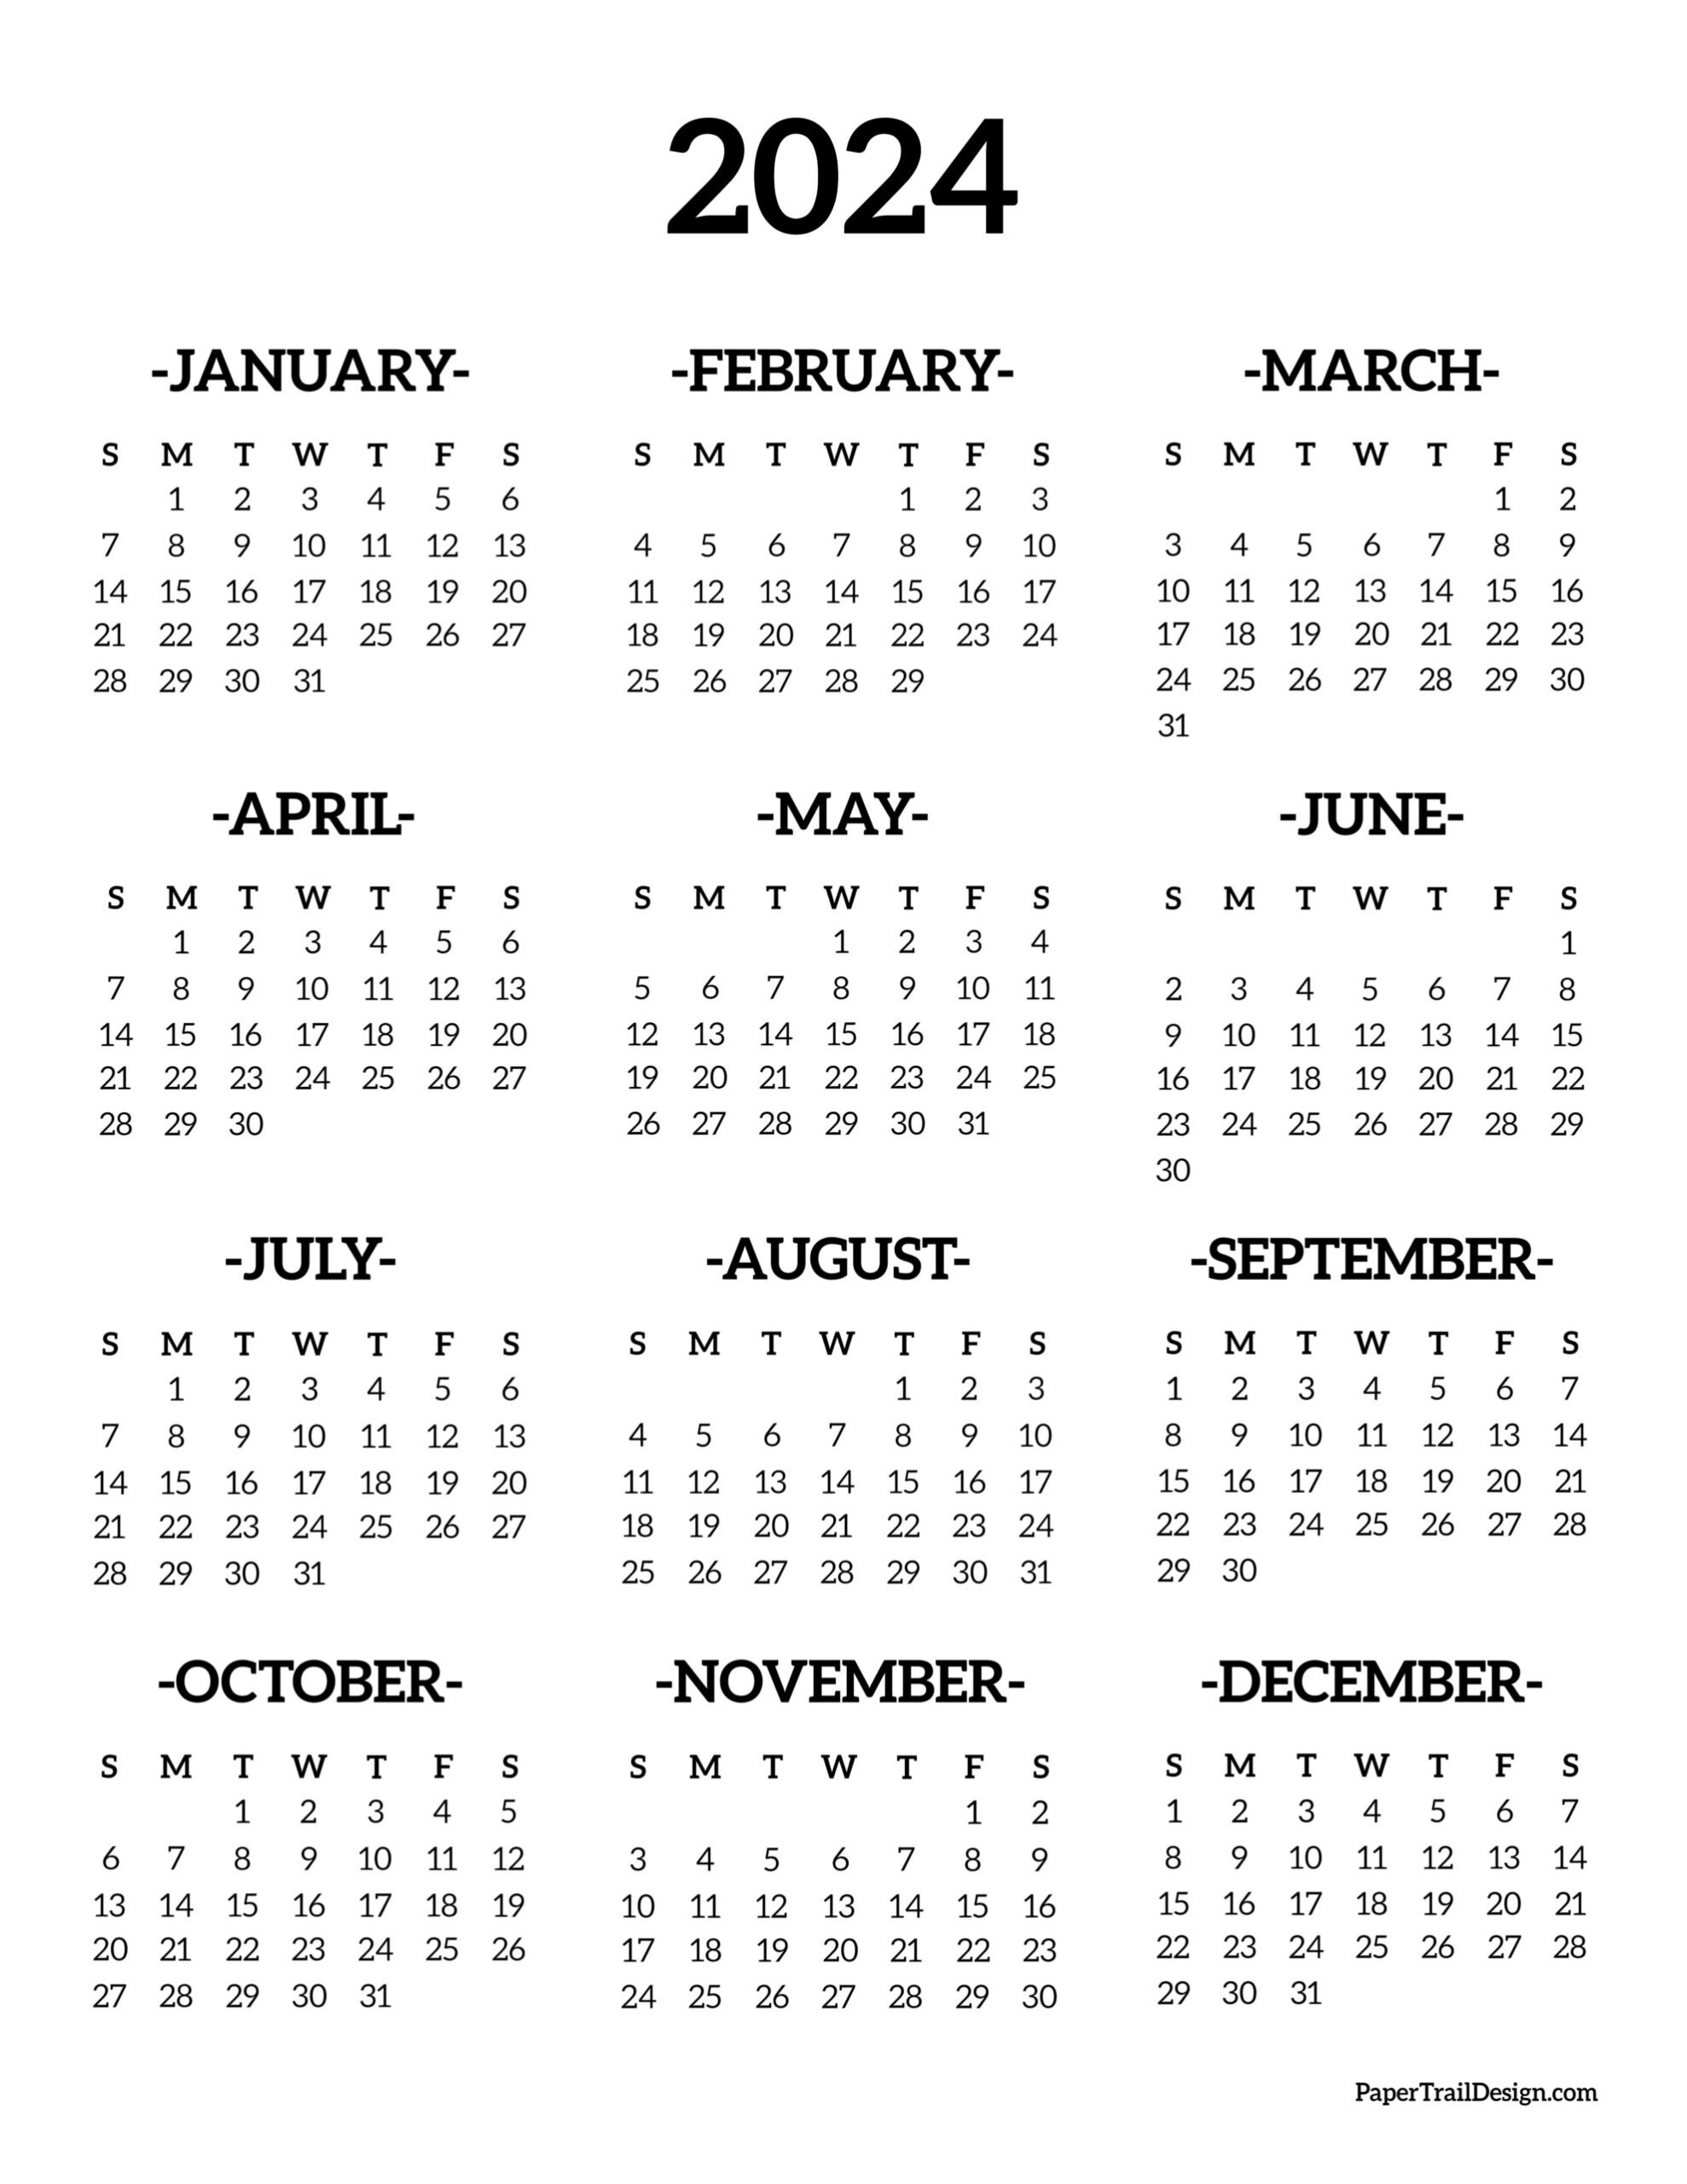 Calendar 2024 Printable One Page - Paper Trail Design | 2024 Yearly Calendar One Page